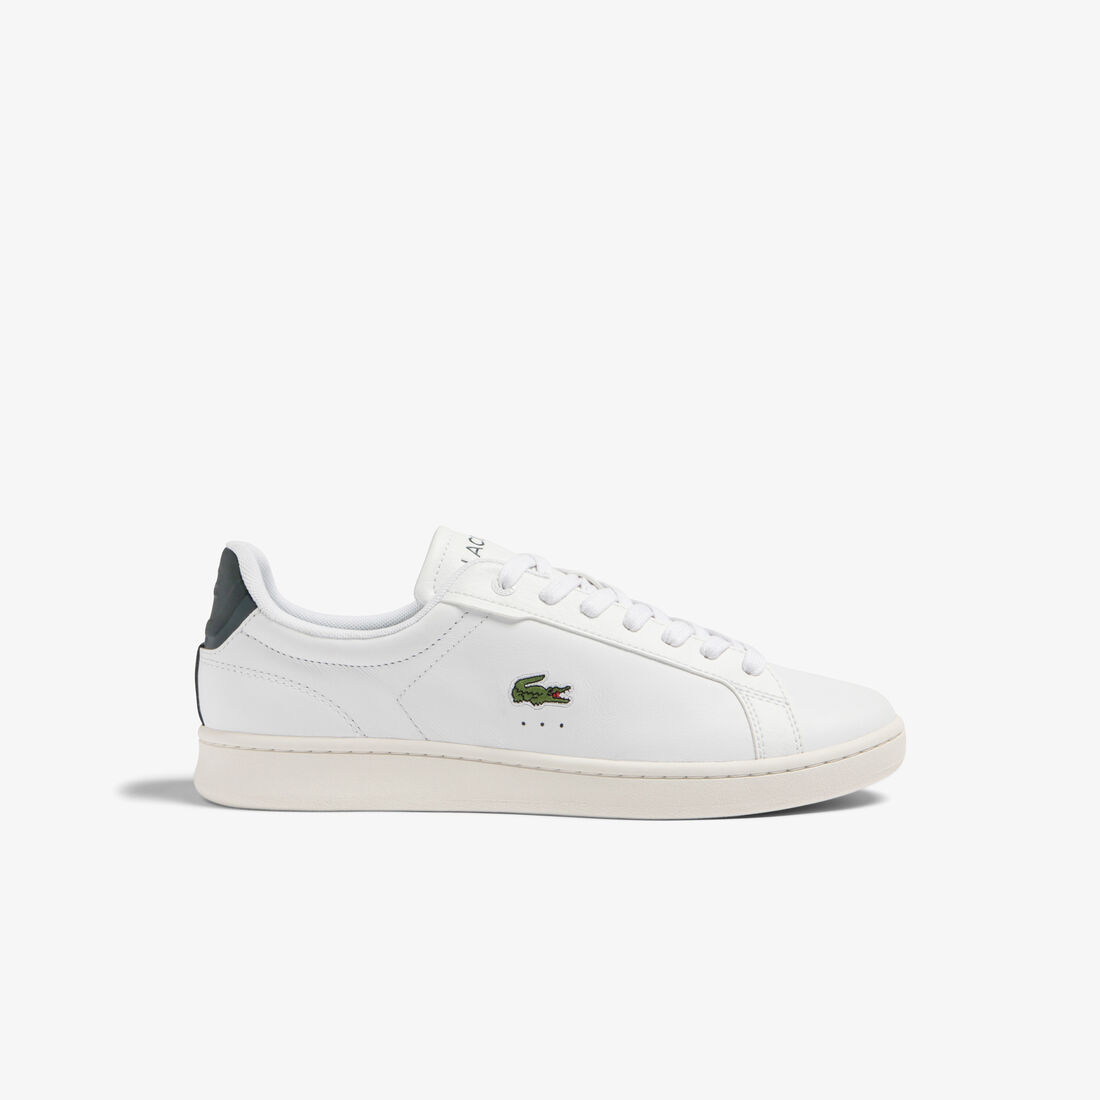 Men's Lacoste Carnaby Pro Leather Premium Trainers - 45SMA0112-1R5